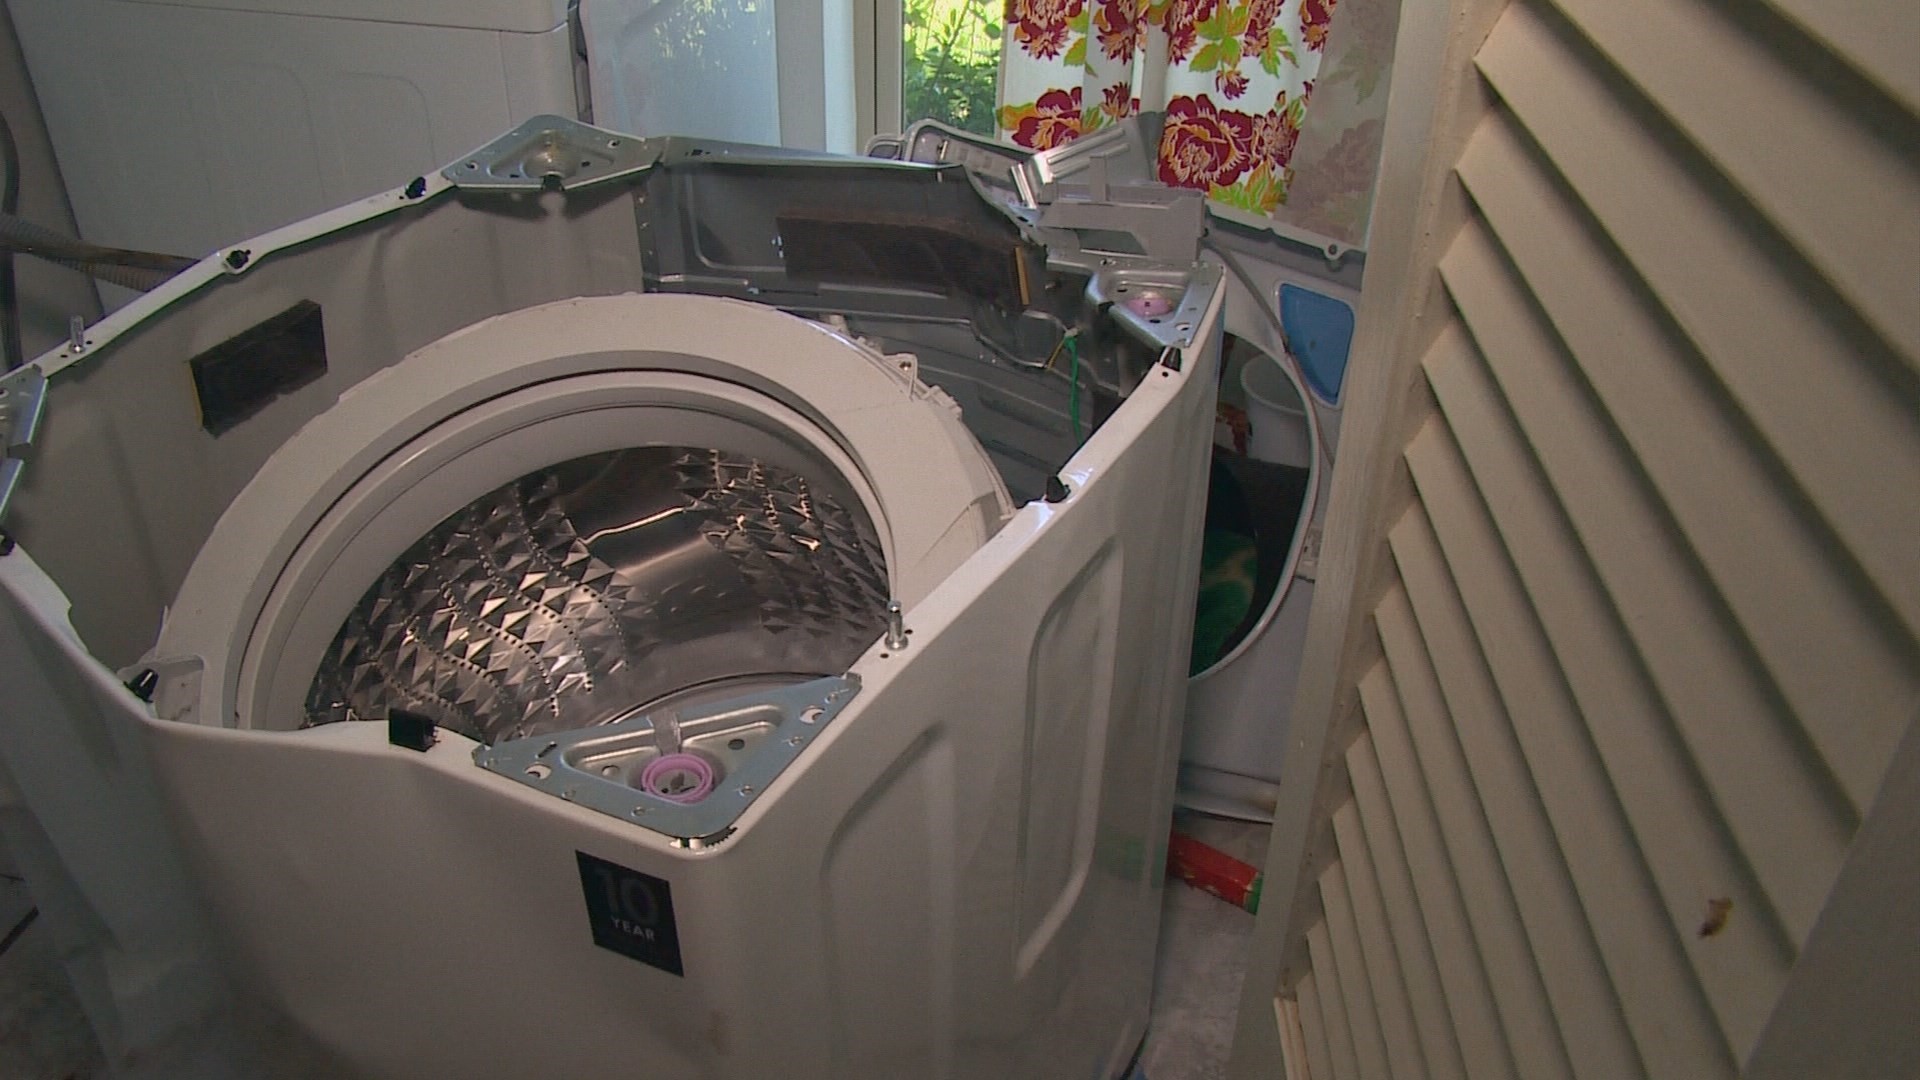 Samsung Washer That Exploded in Texas Home Was On Recall List